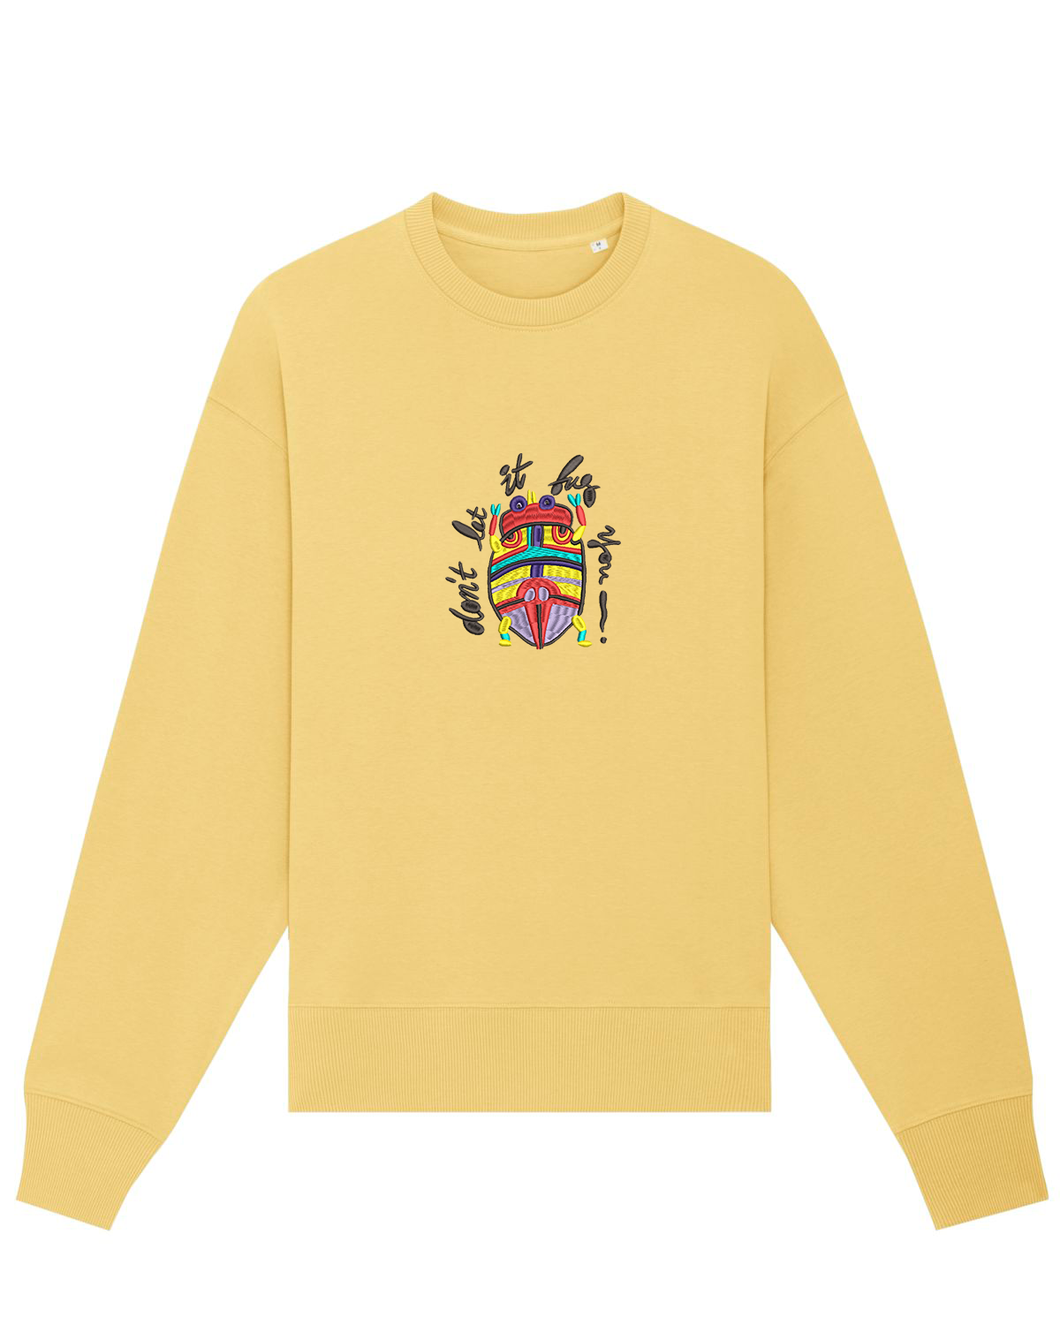 Don't let it bug you 🐞 - Embroidered UNISEX RELAXED CREW NECK SWEATSHIRT-OUTLET🔴